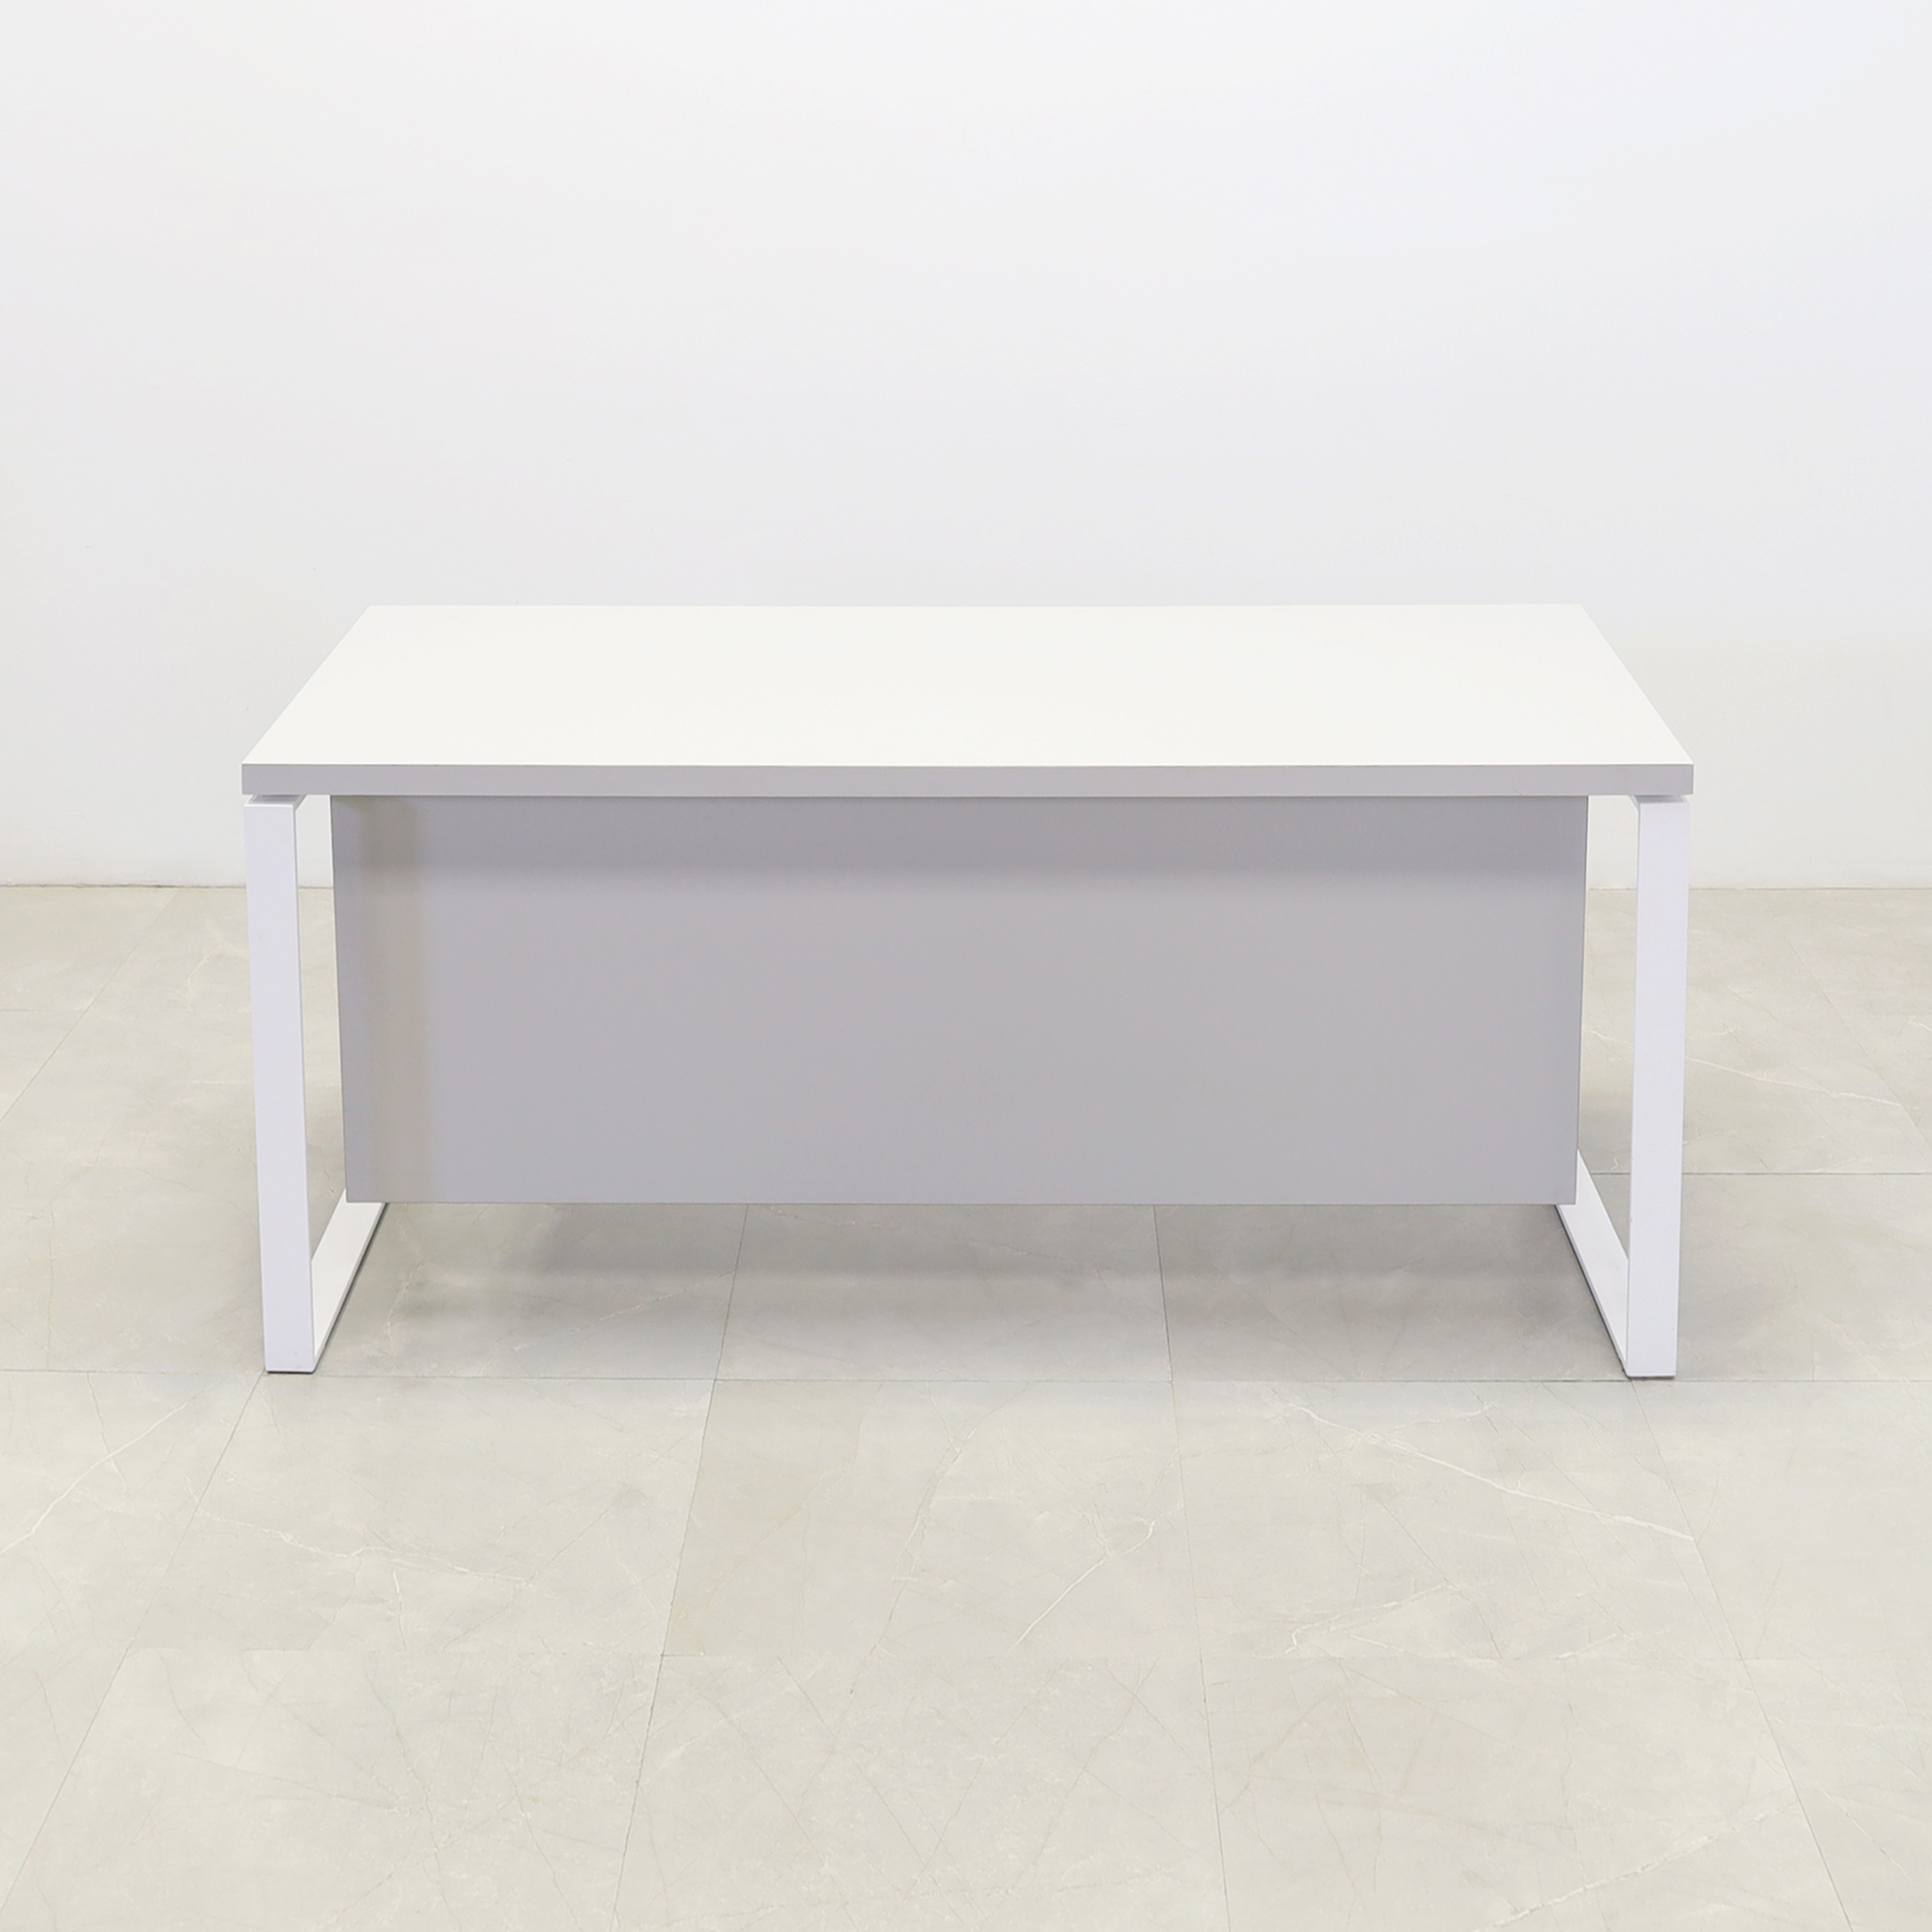 Aspen Straight Executive Desk With Laminate Top in folkstone gray matte laminate top and privacy panel, and white metal legs shown here.